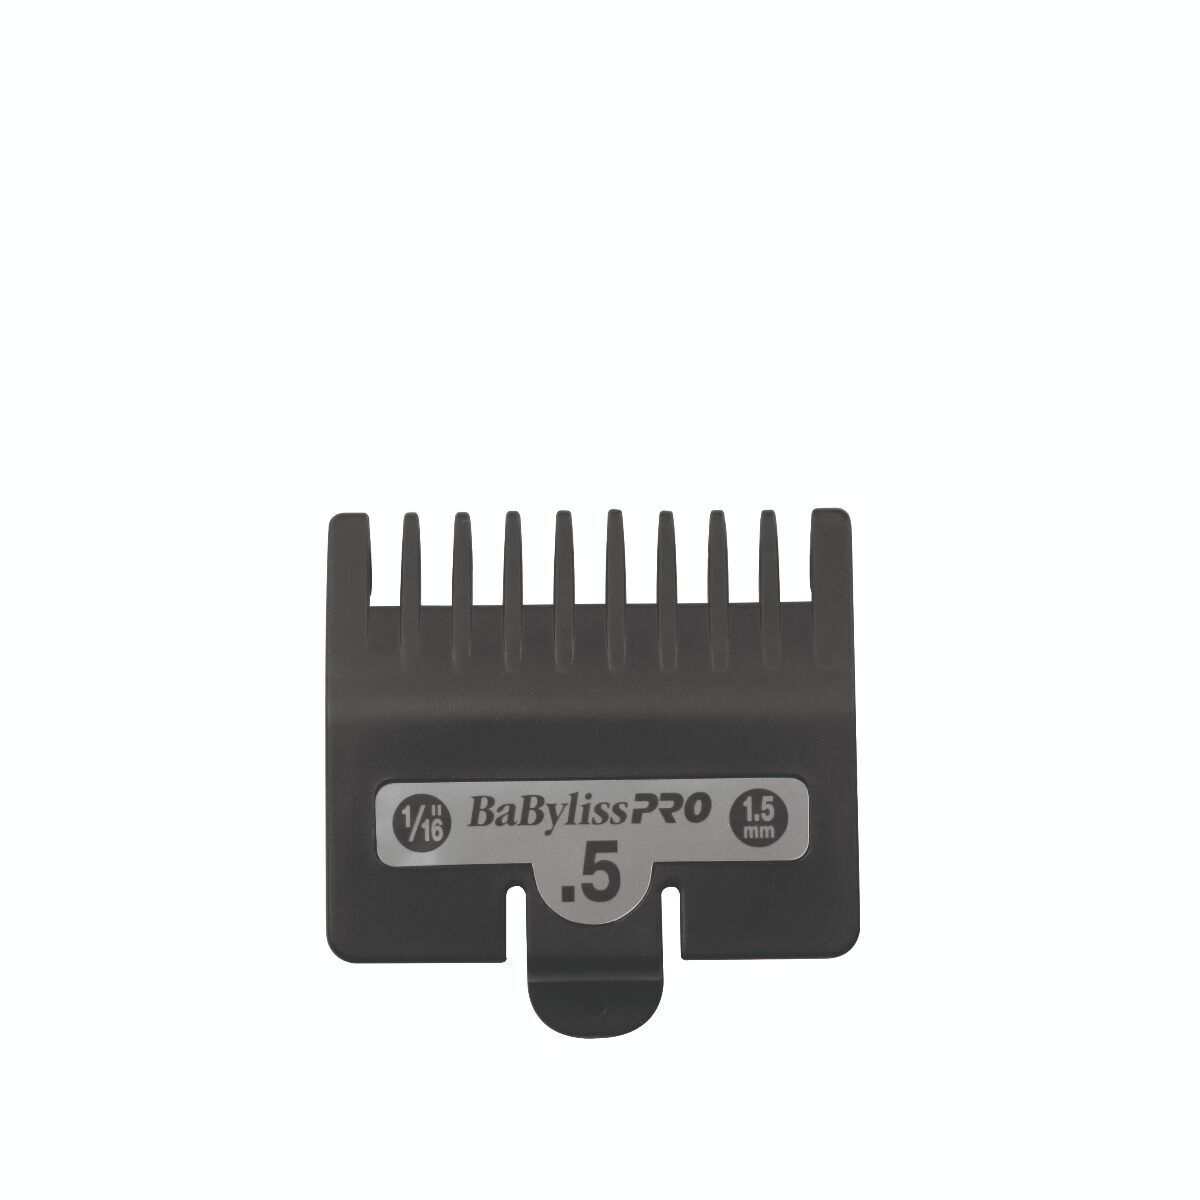 Babyliss PRO Babyliss PRO 4Artists Barbers's Clipper Cutting Guide 1,5mm